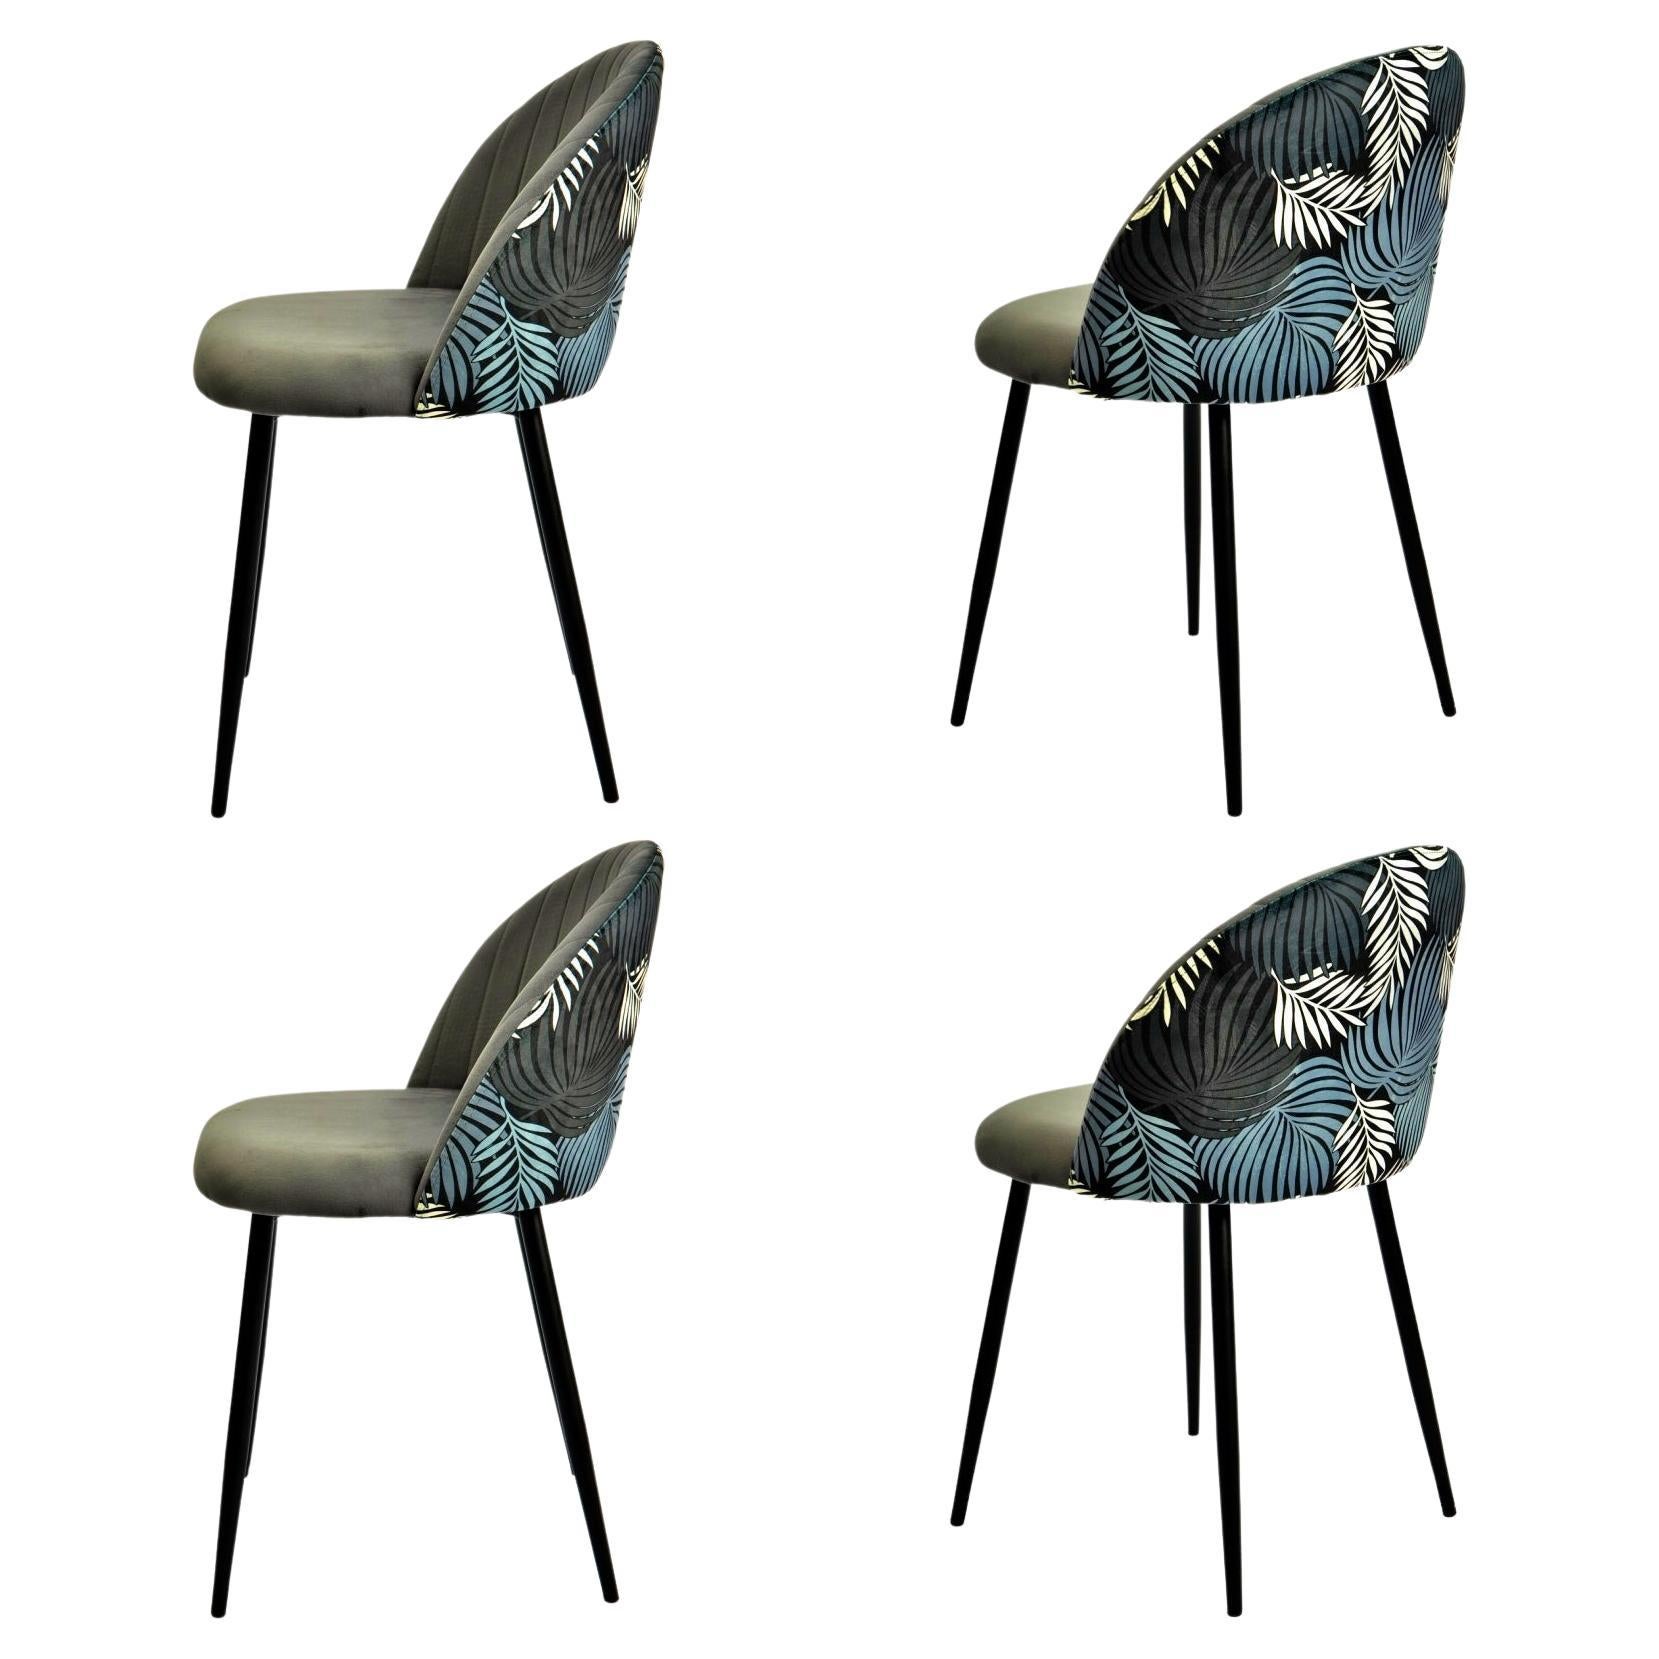 New 4 Gray Velvet Upholstered Chairs with Floral Back For Sale